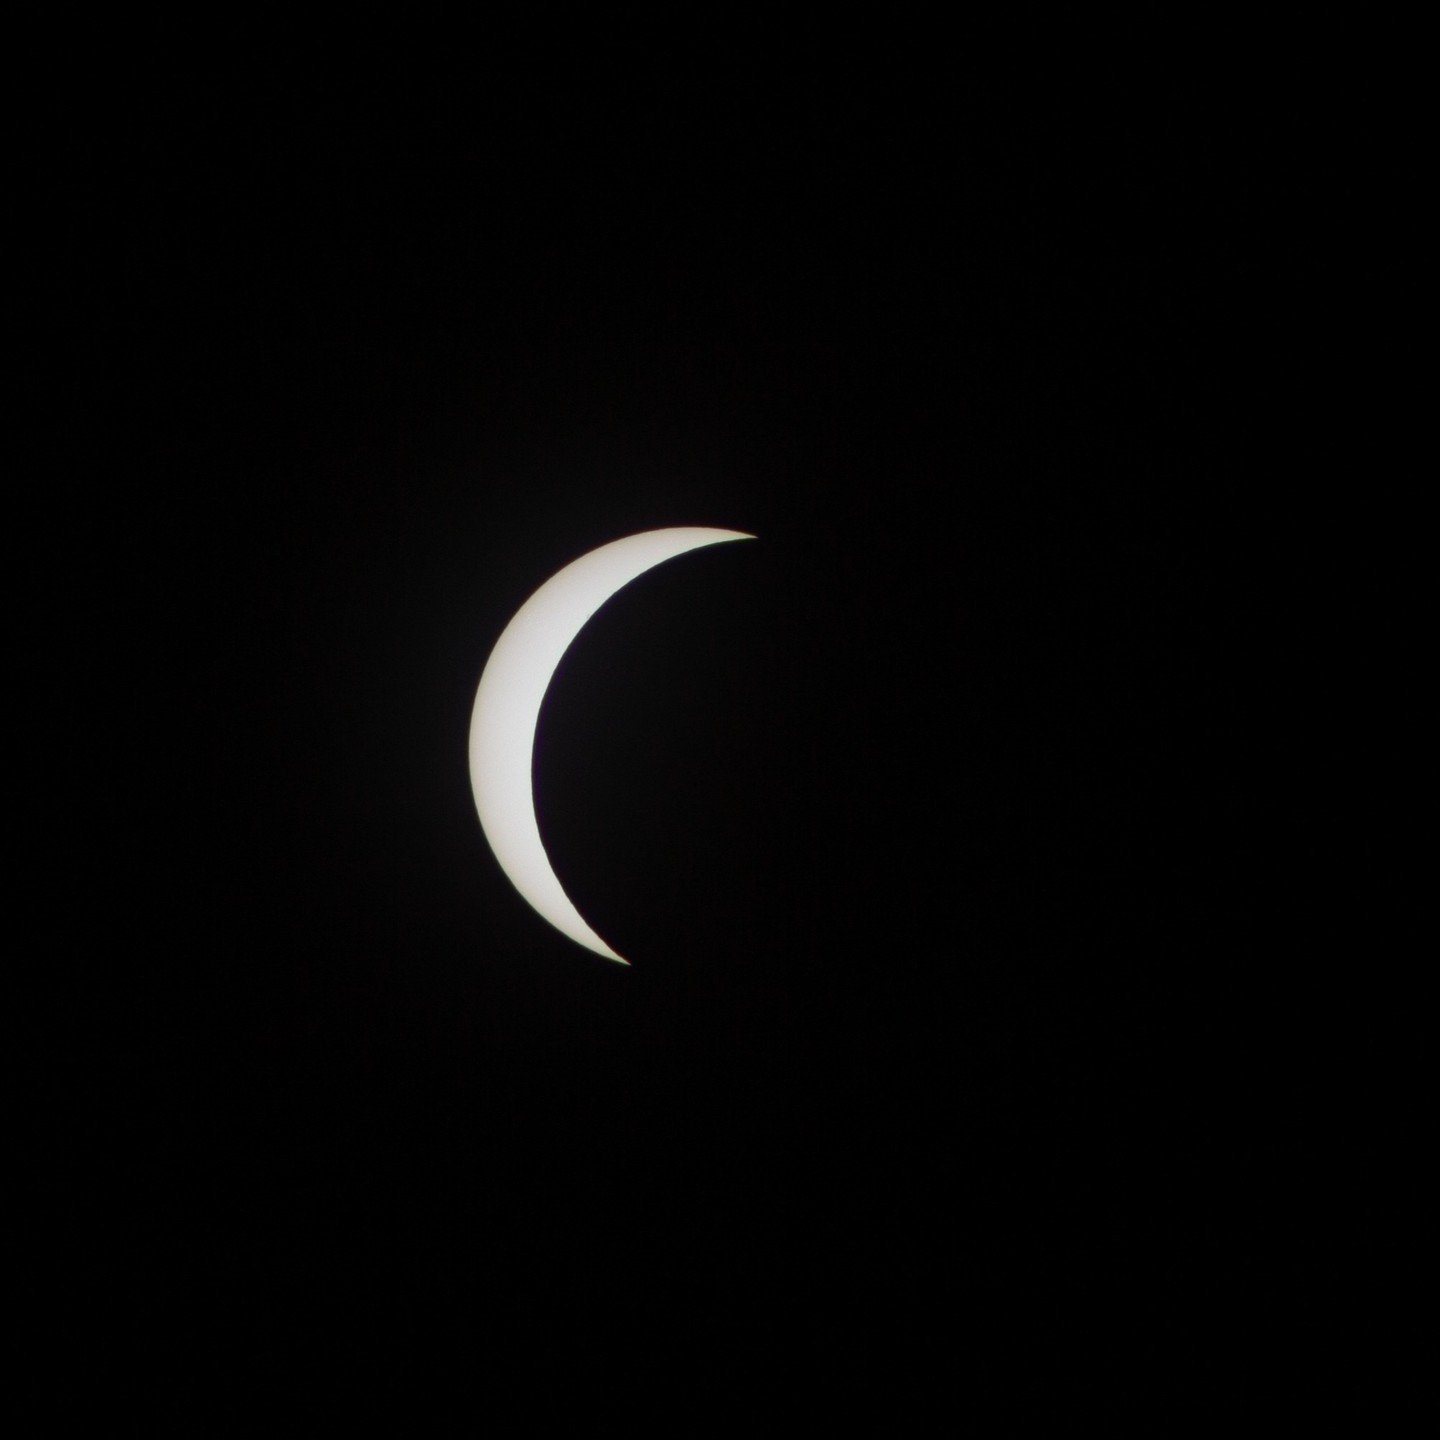 No totality this time, but still a cool sight! Here's hoping to make it to the 2026 totality in Spain...

https://www.messierphotography.com/astrophotography#/eclipse/